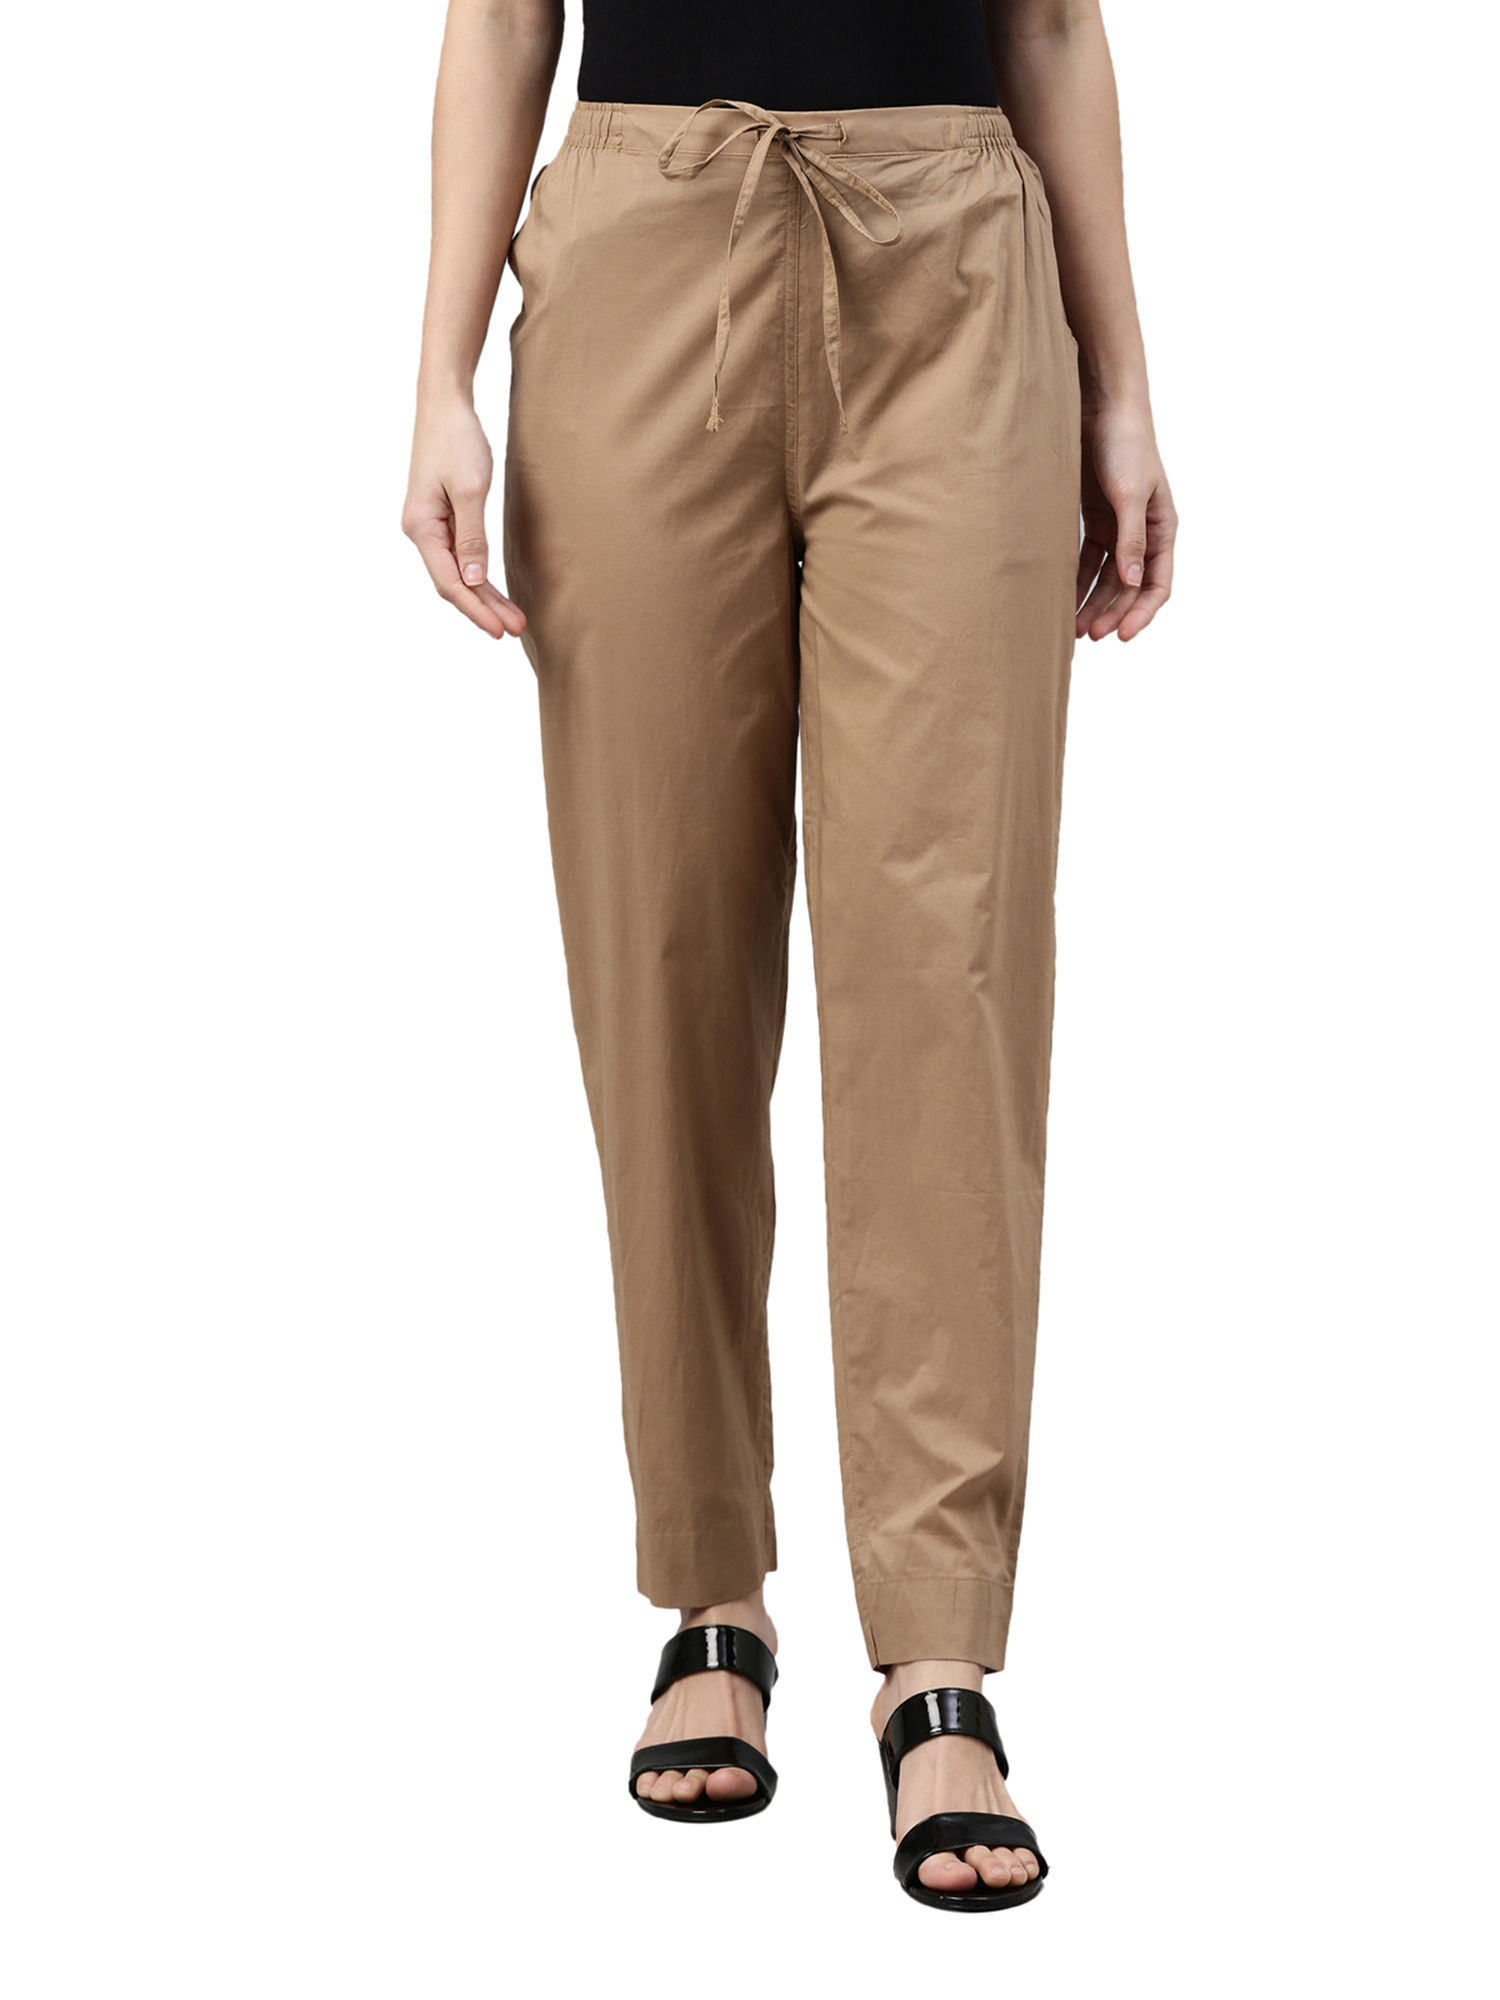 Shop HighWaist Paperbag Pants for Women from latest collection at Forever  21  332315